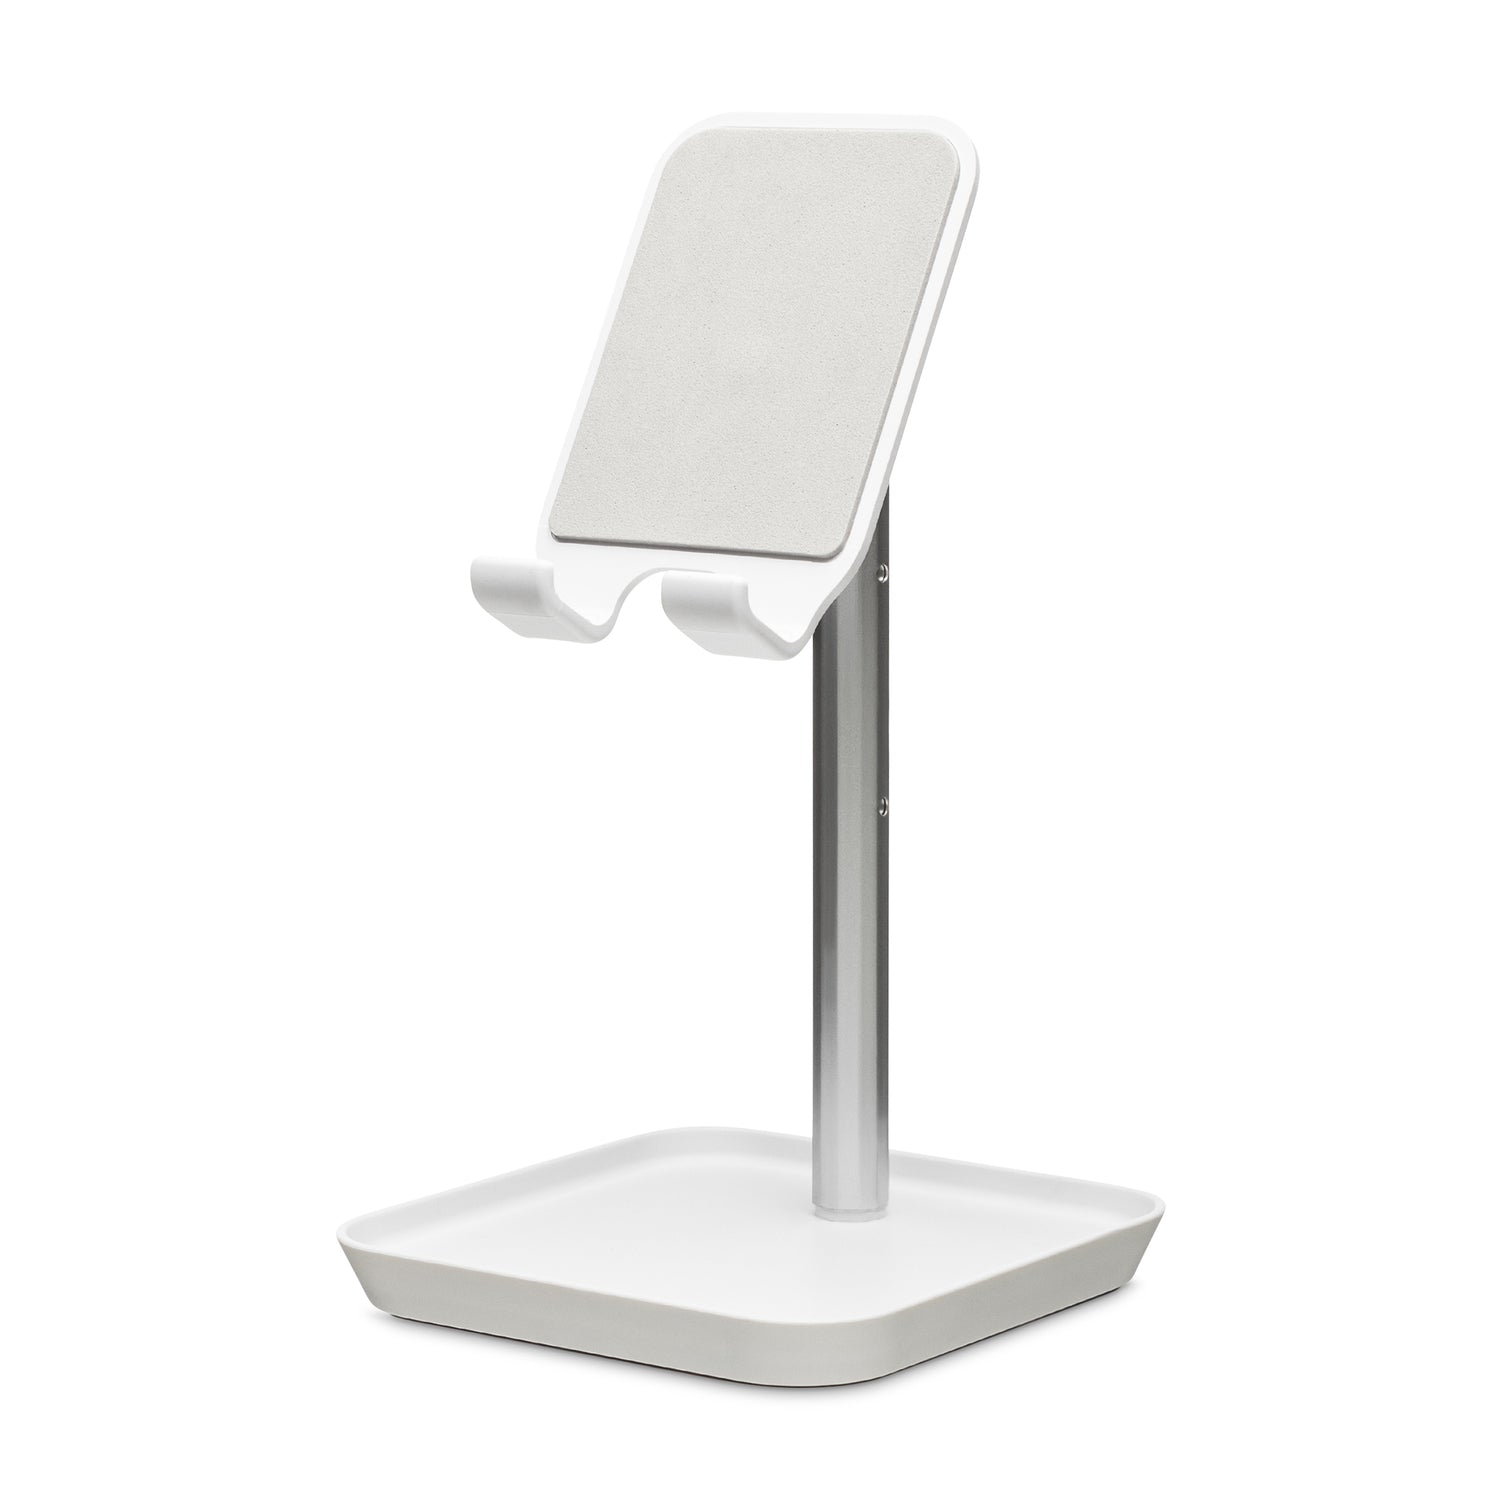 The Perfect Phone Stand in White